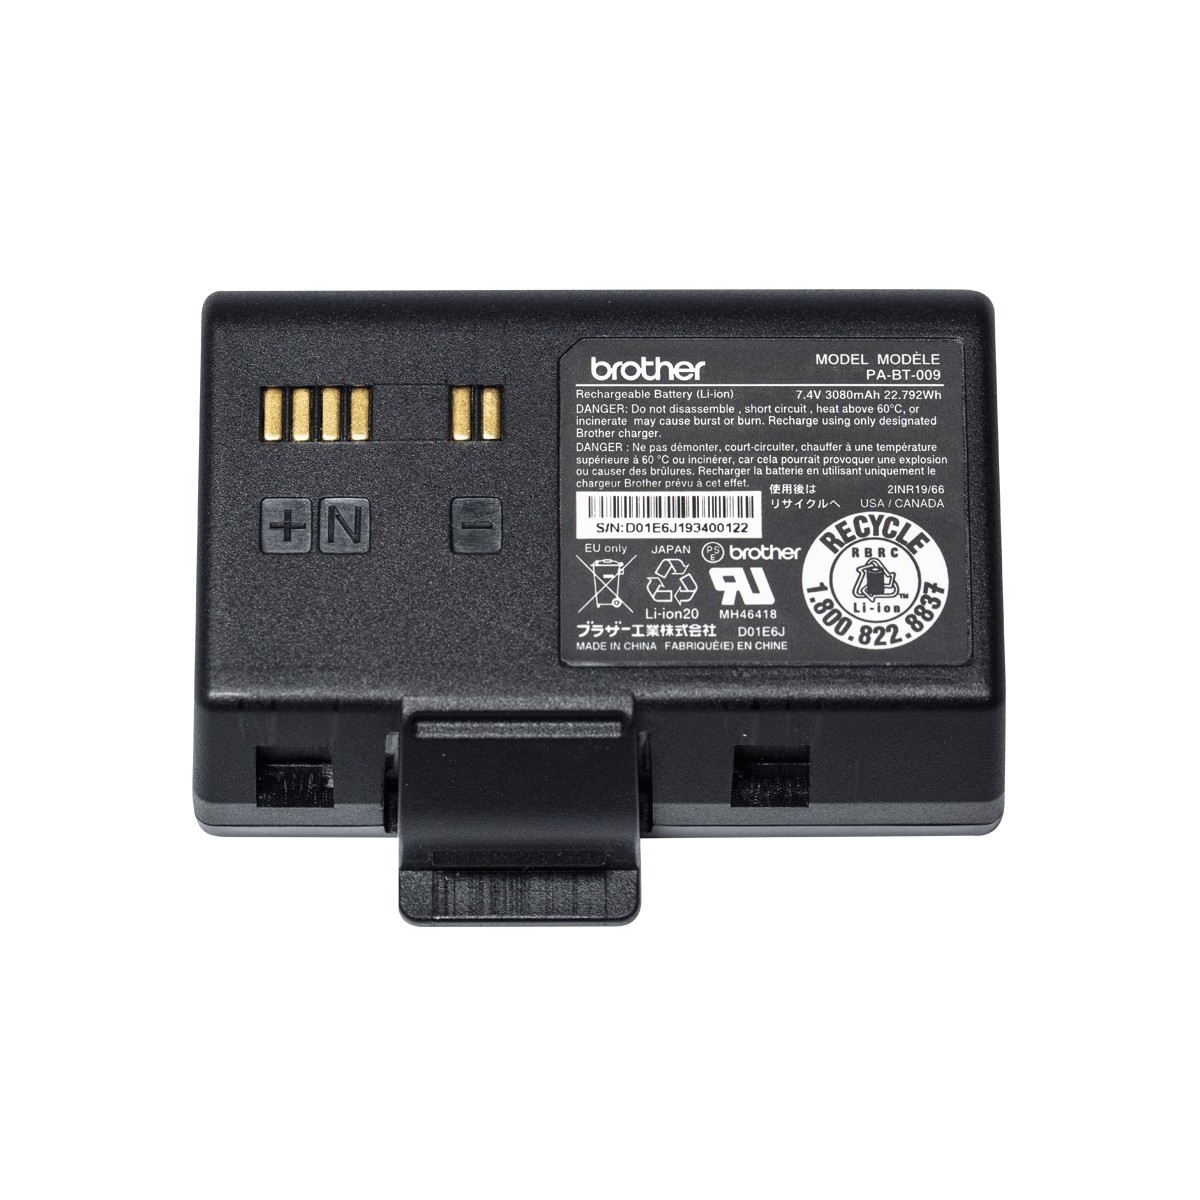 Brother PA-BT-009 - Battery - Black - 1 pc(s)